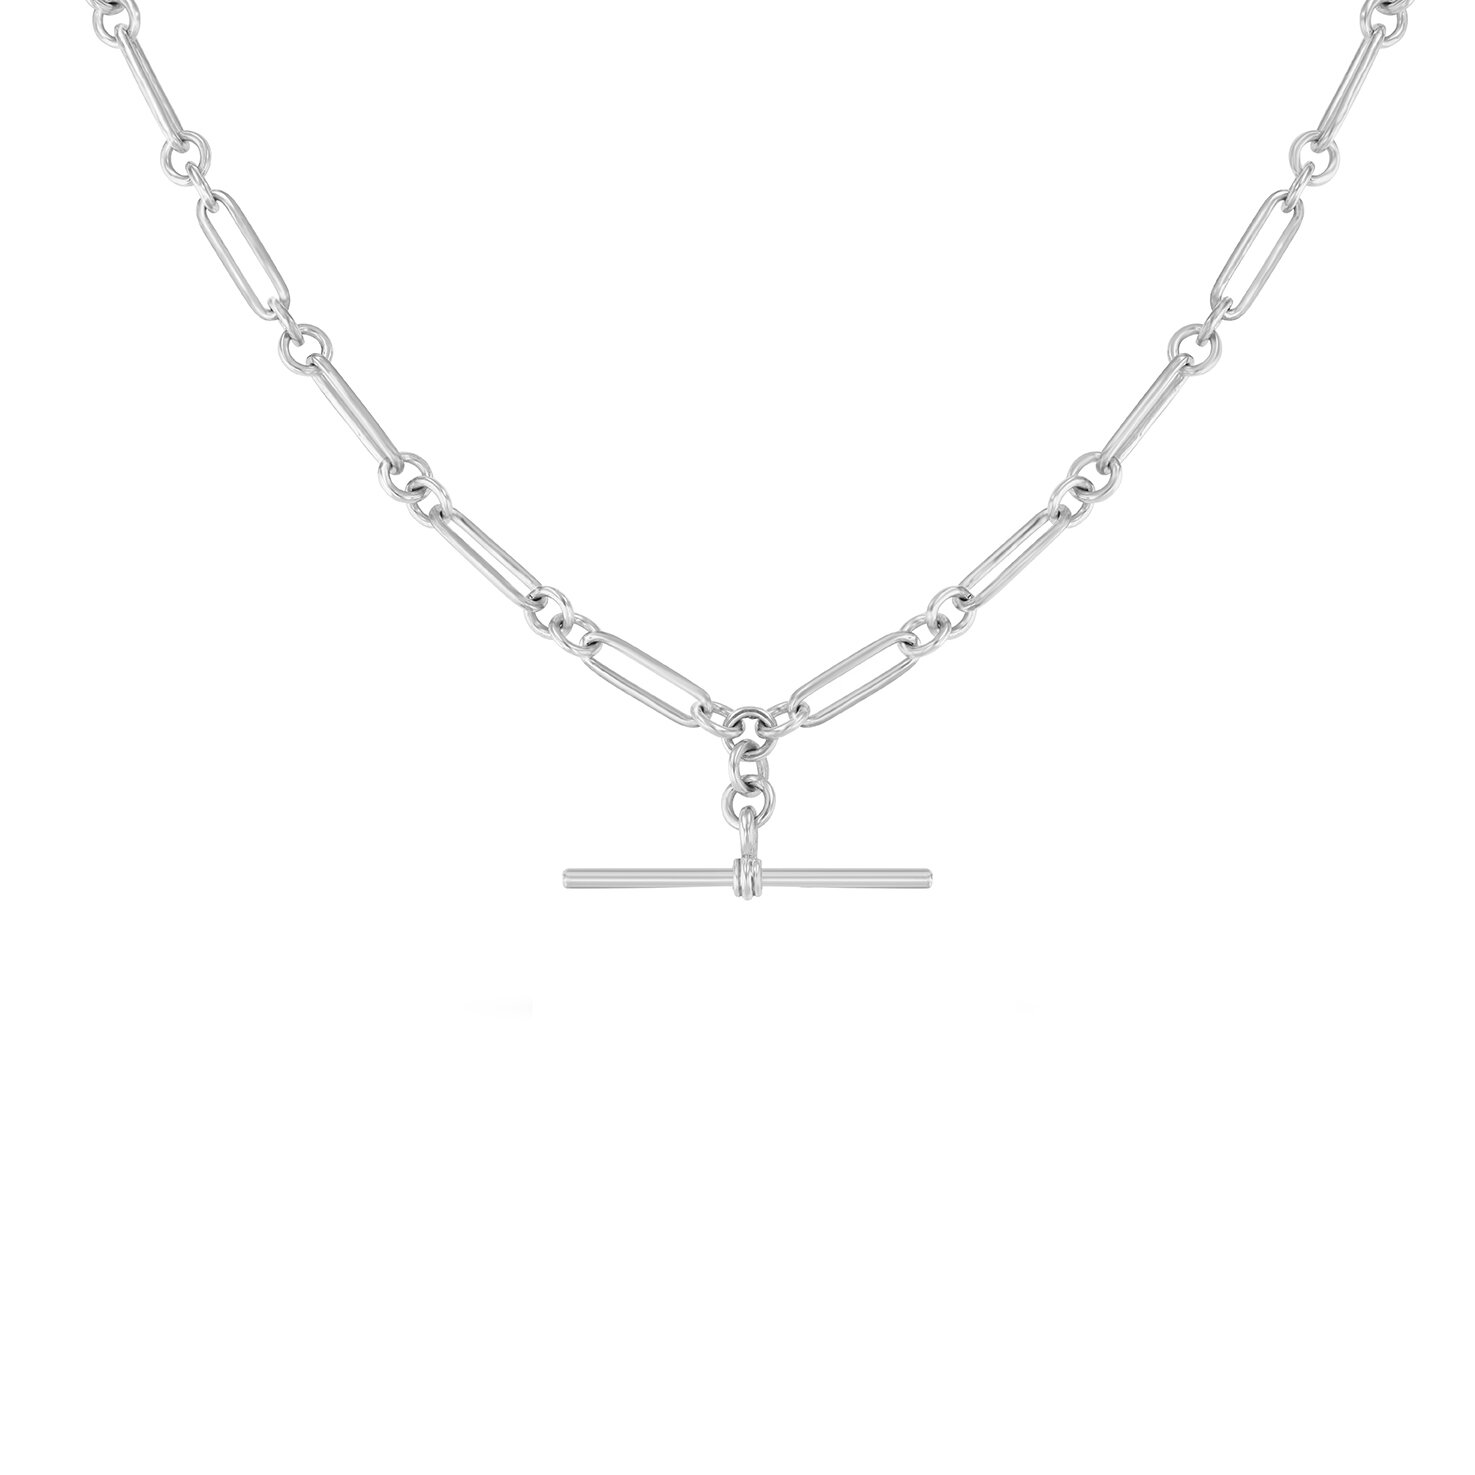 Solid Sterling Silver Heart T-bar Necklace, British Made, Hallmarked